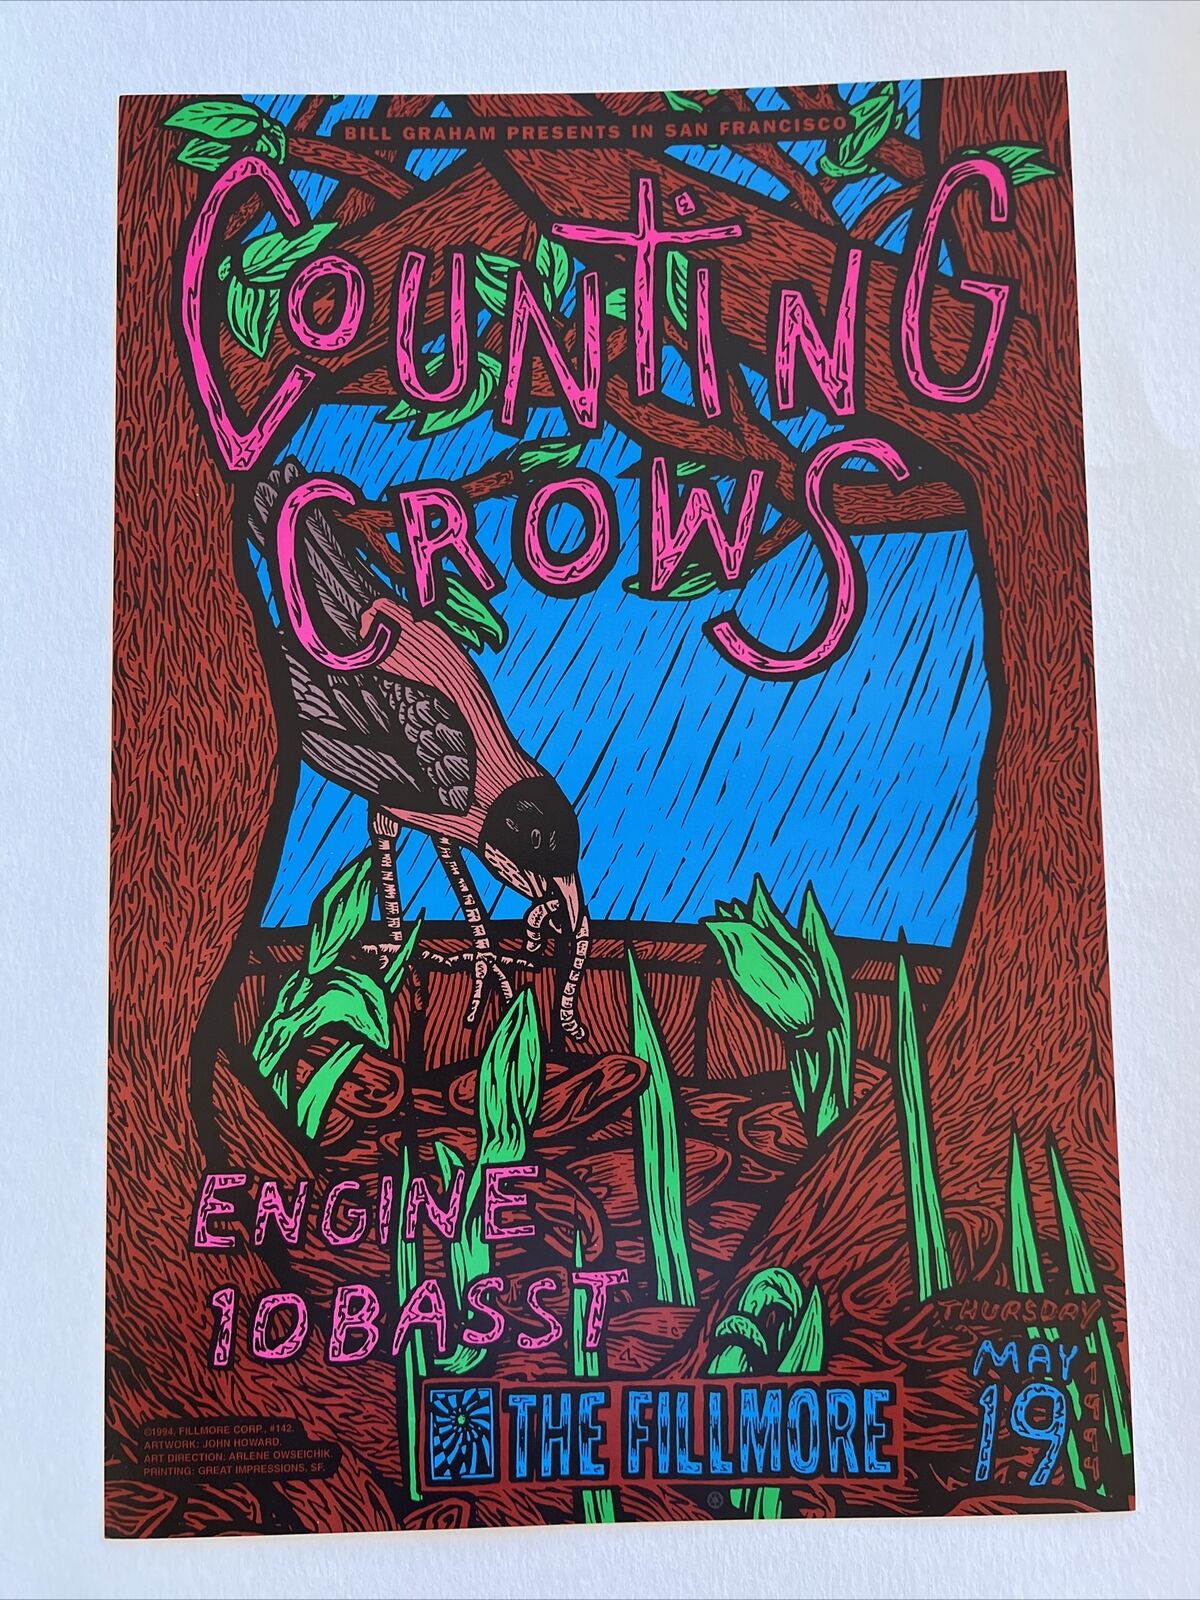 Counting Crows Original Concert Poster Fillmore May 19 1994 Set Part 1 Of 4